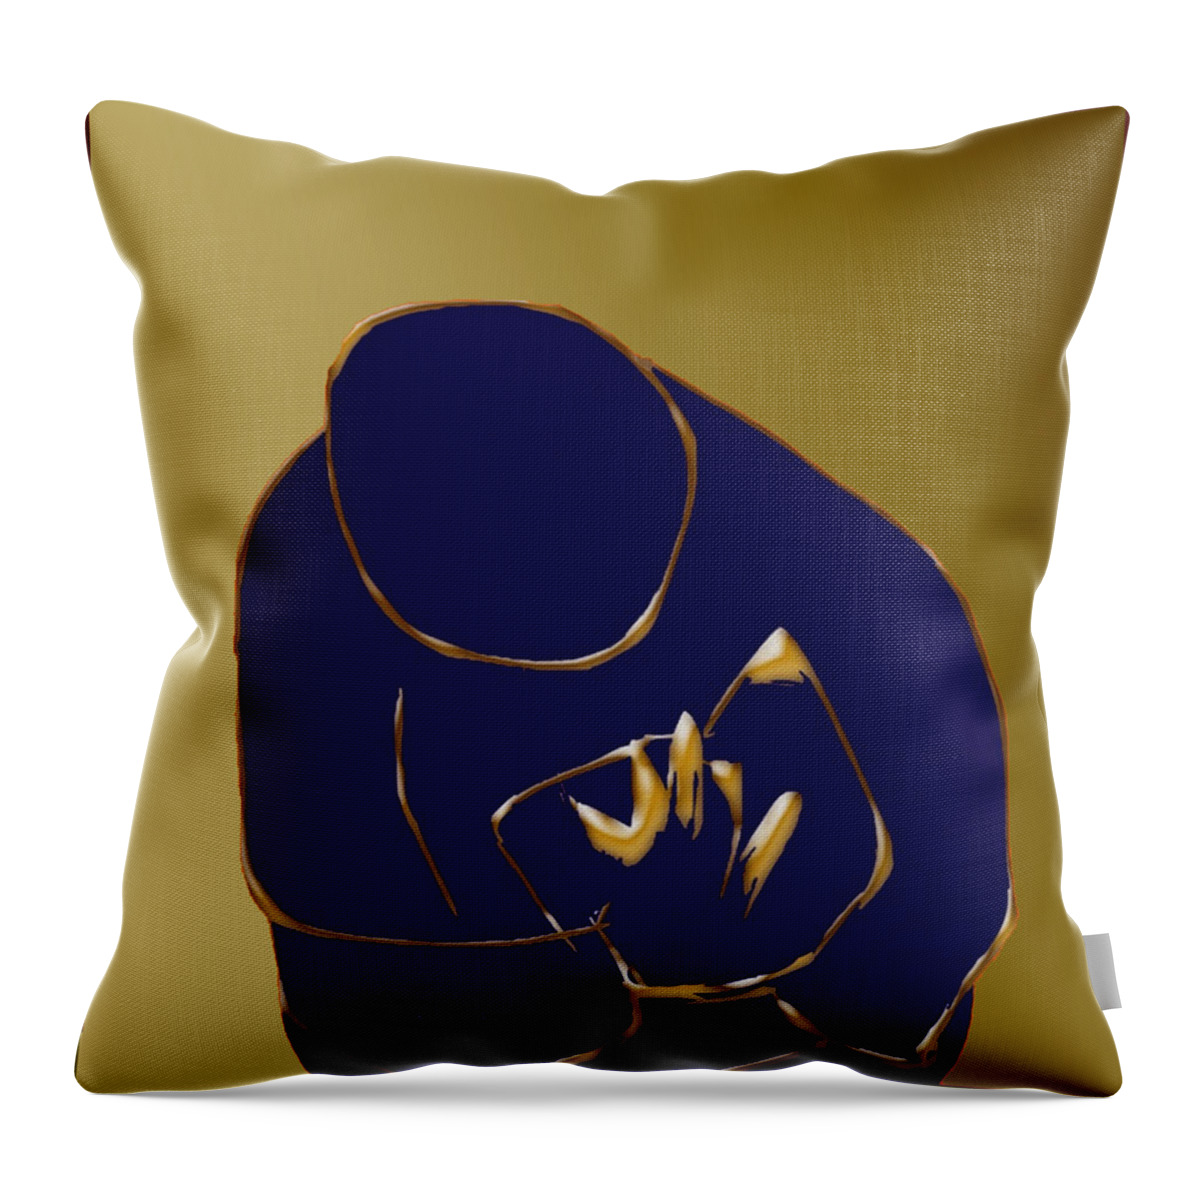 Young Reader Throw Pillow featuring the digital art Good Read #1 by Asok Mukhopadhyay